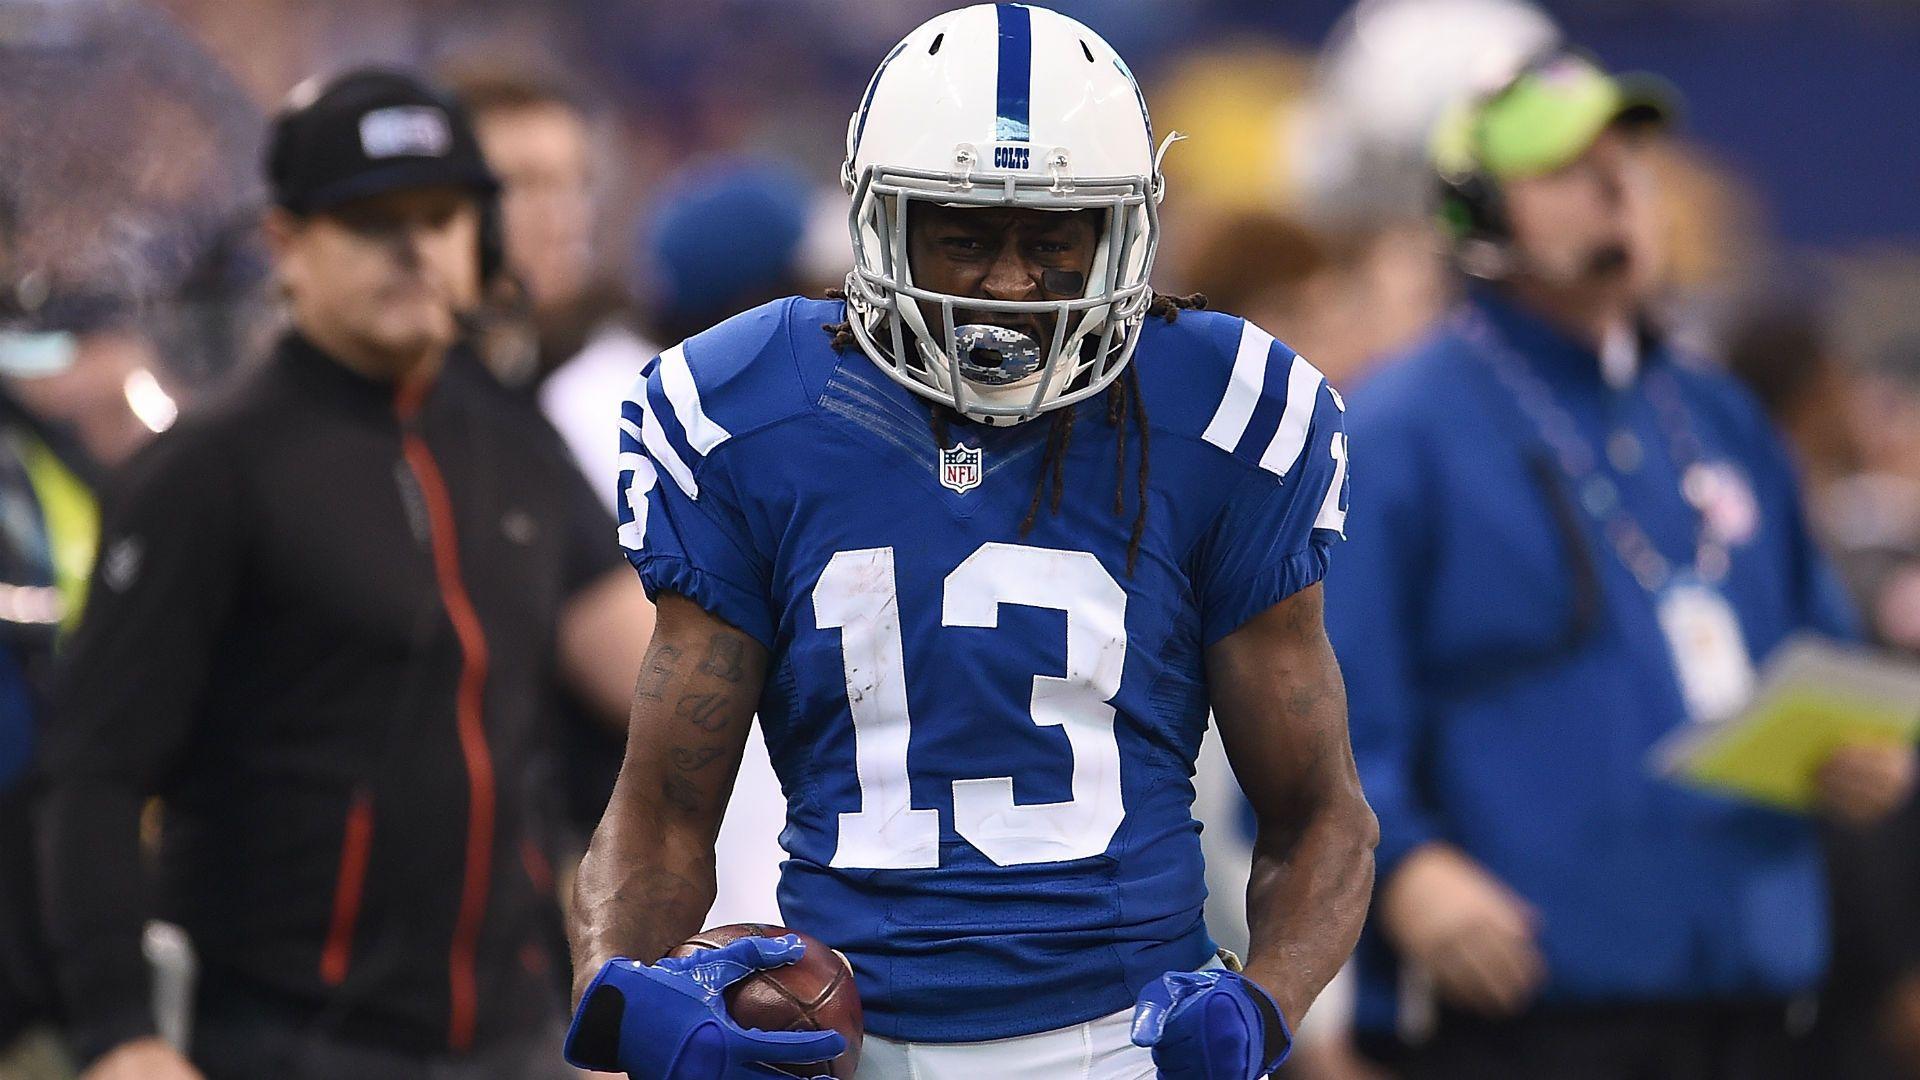 Fantasy injury updates for T.Y. Hilton, Andrew Luck, Doug Martin